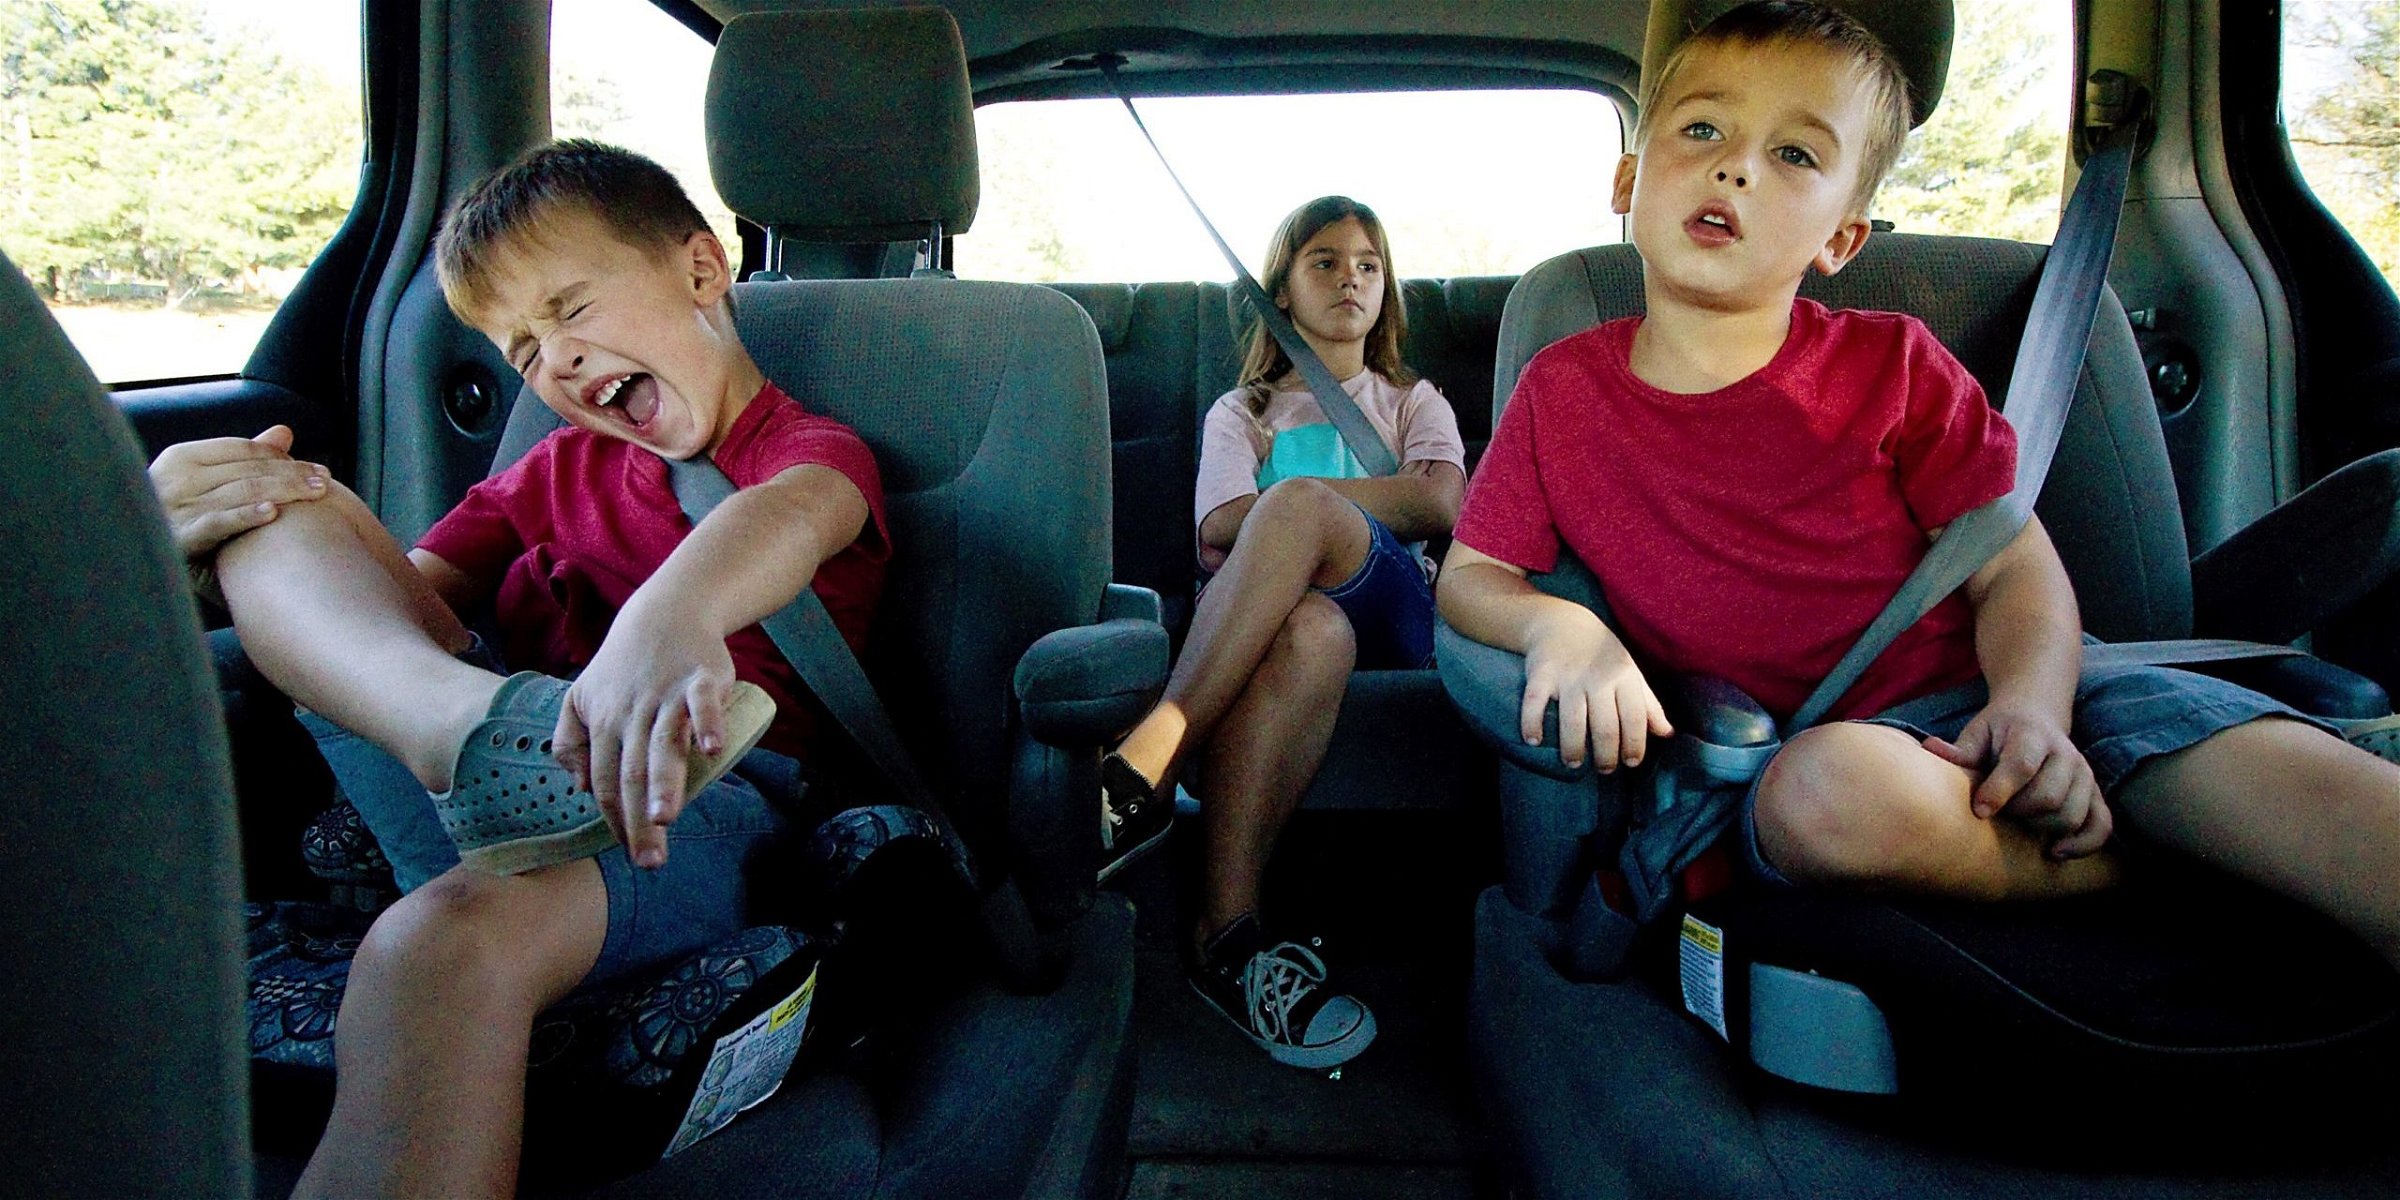 Here’s how to think about carpool safety and how to talk to other parents about it.